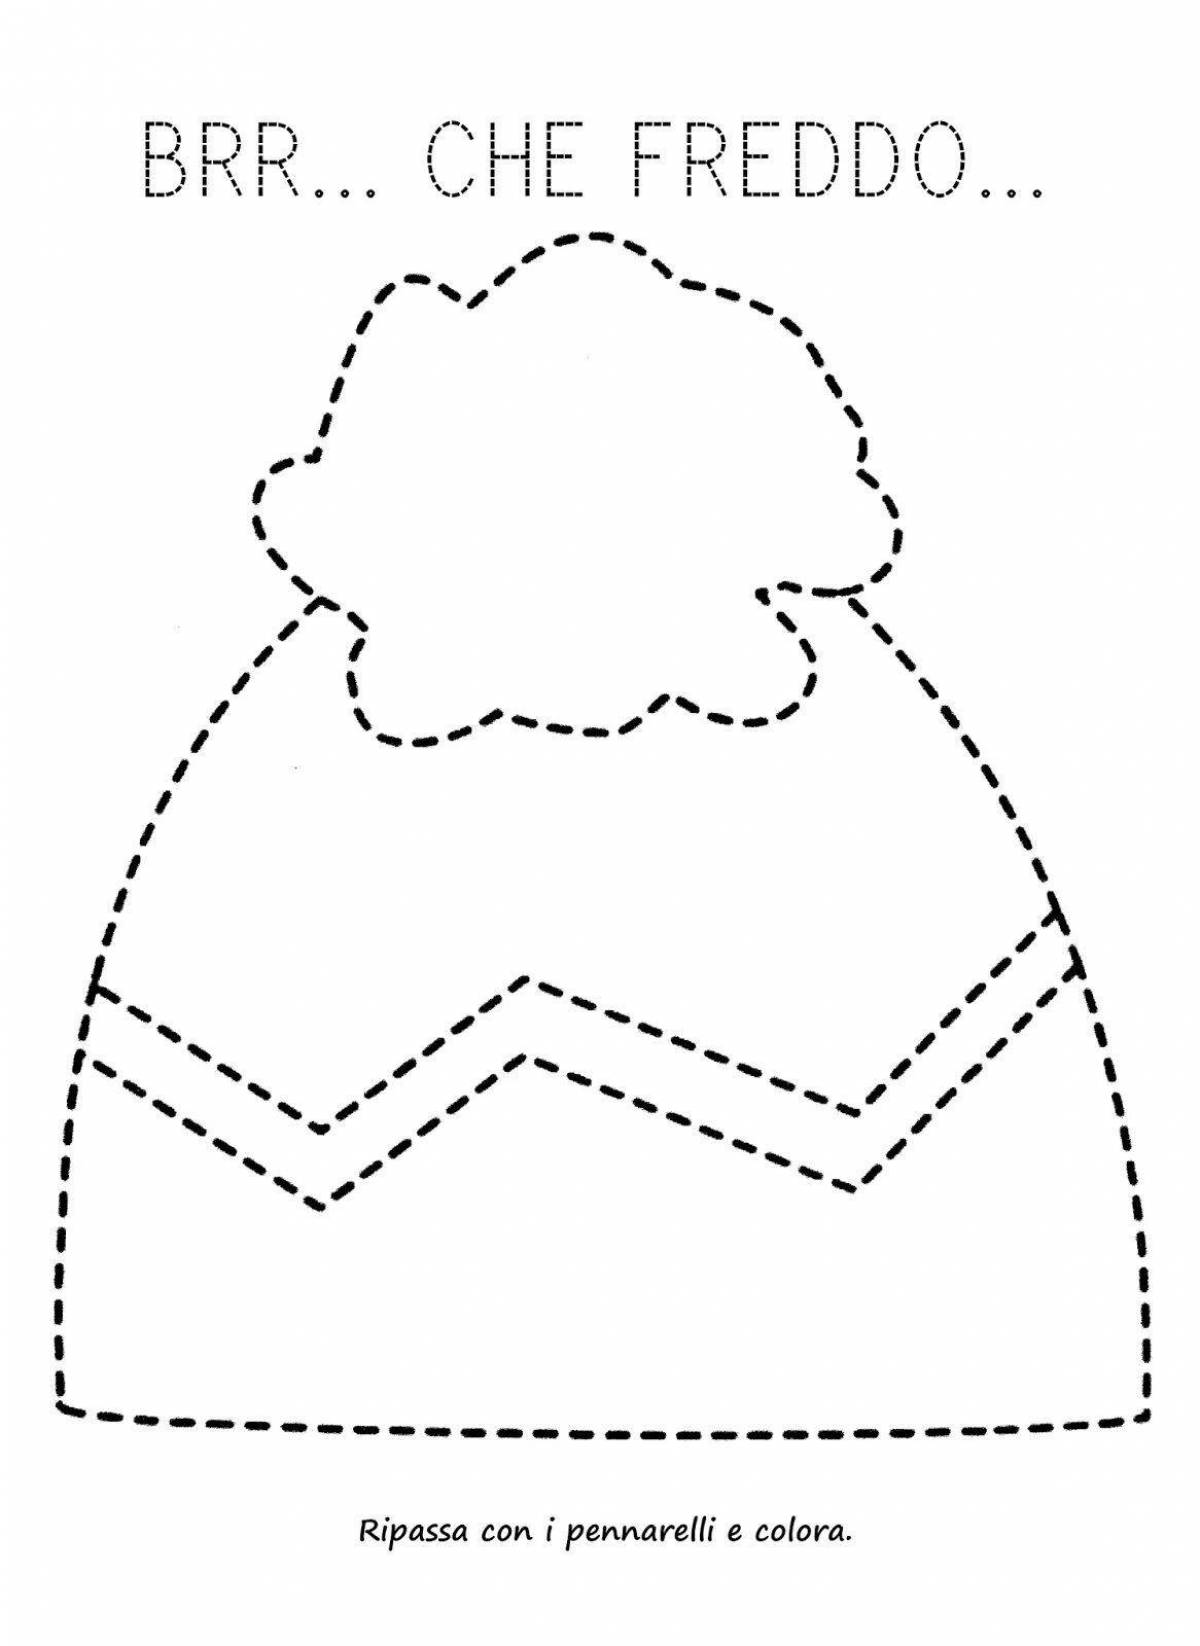 Coloring page glamor cap for children 2-3 years old